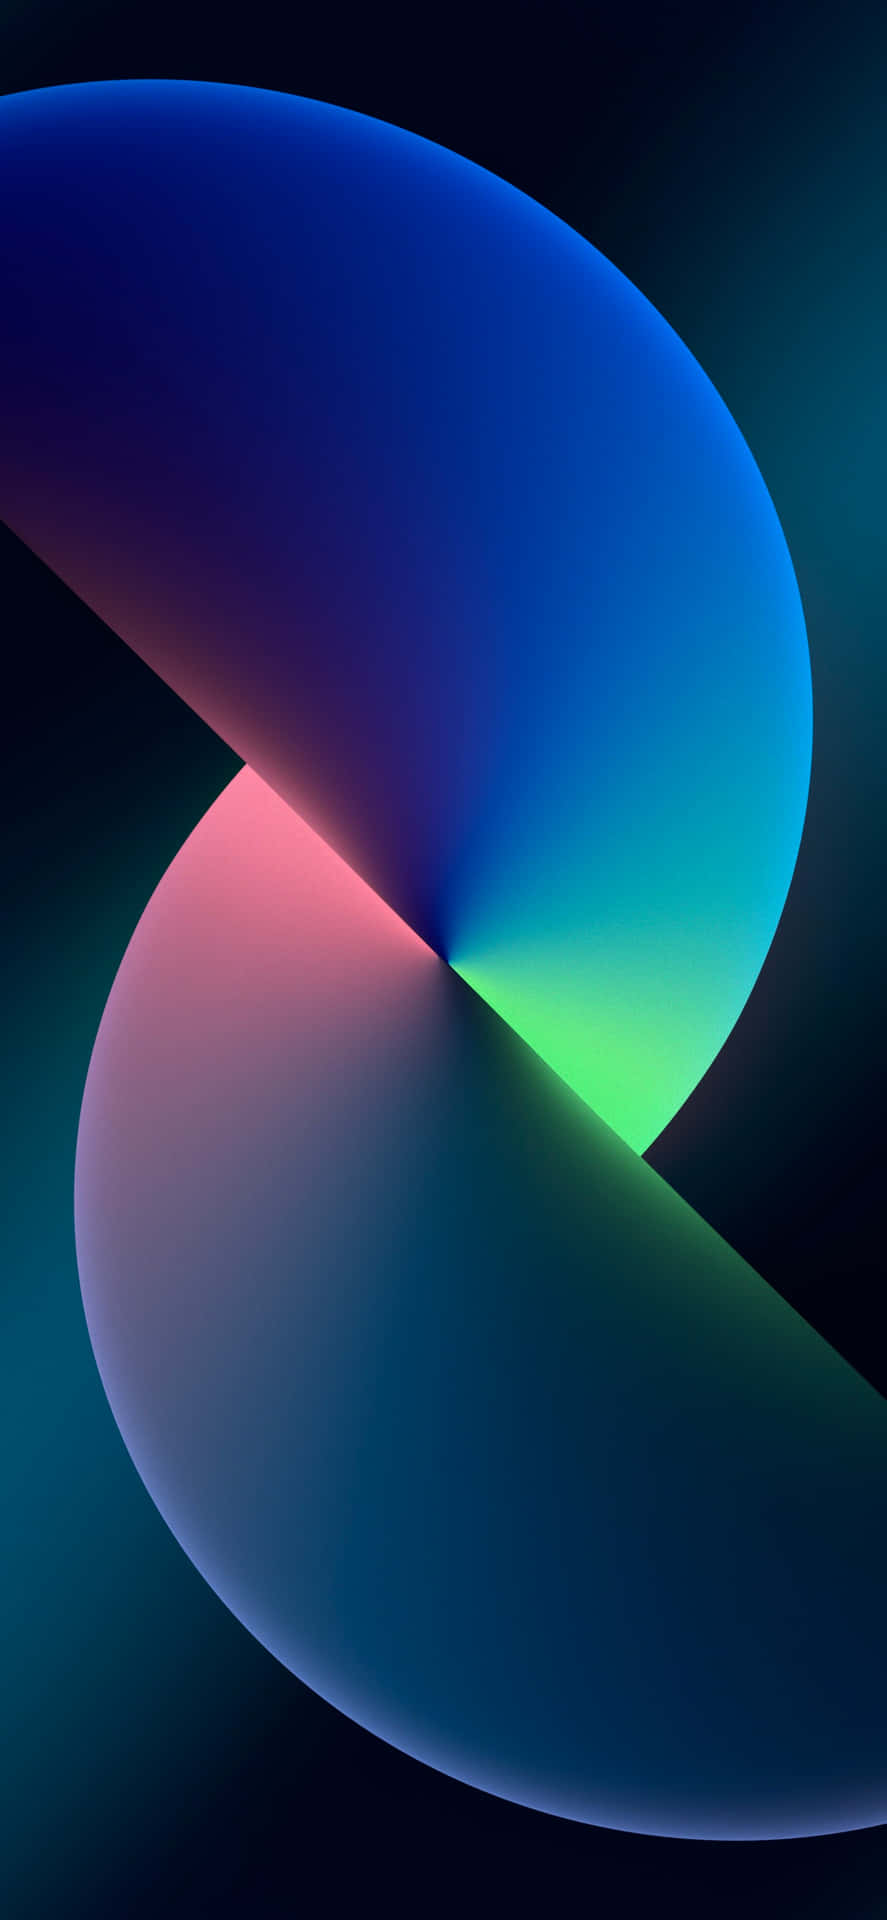 Vibrant Apple Background Displayed on Pixel 3 Screen